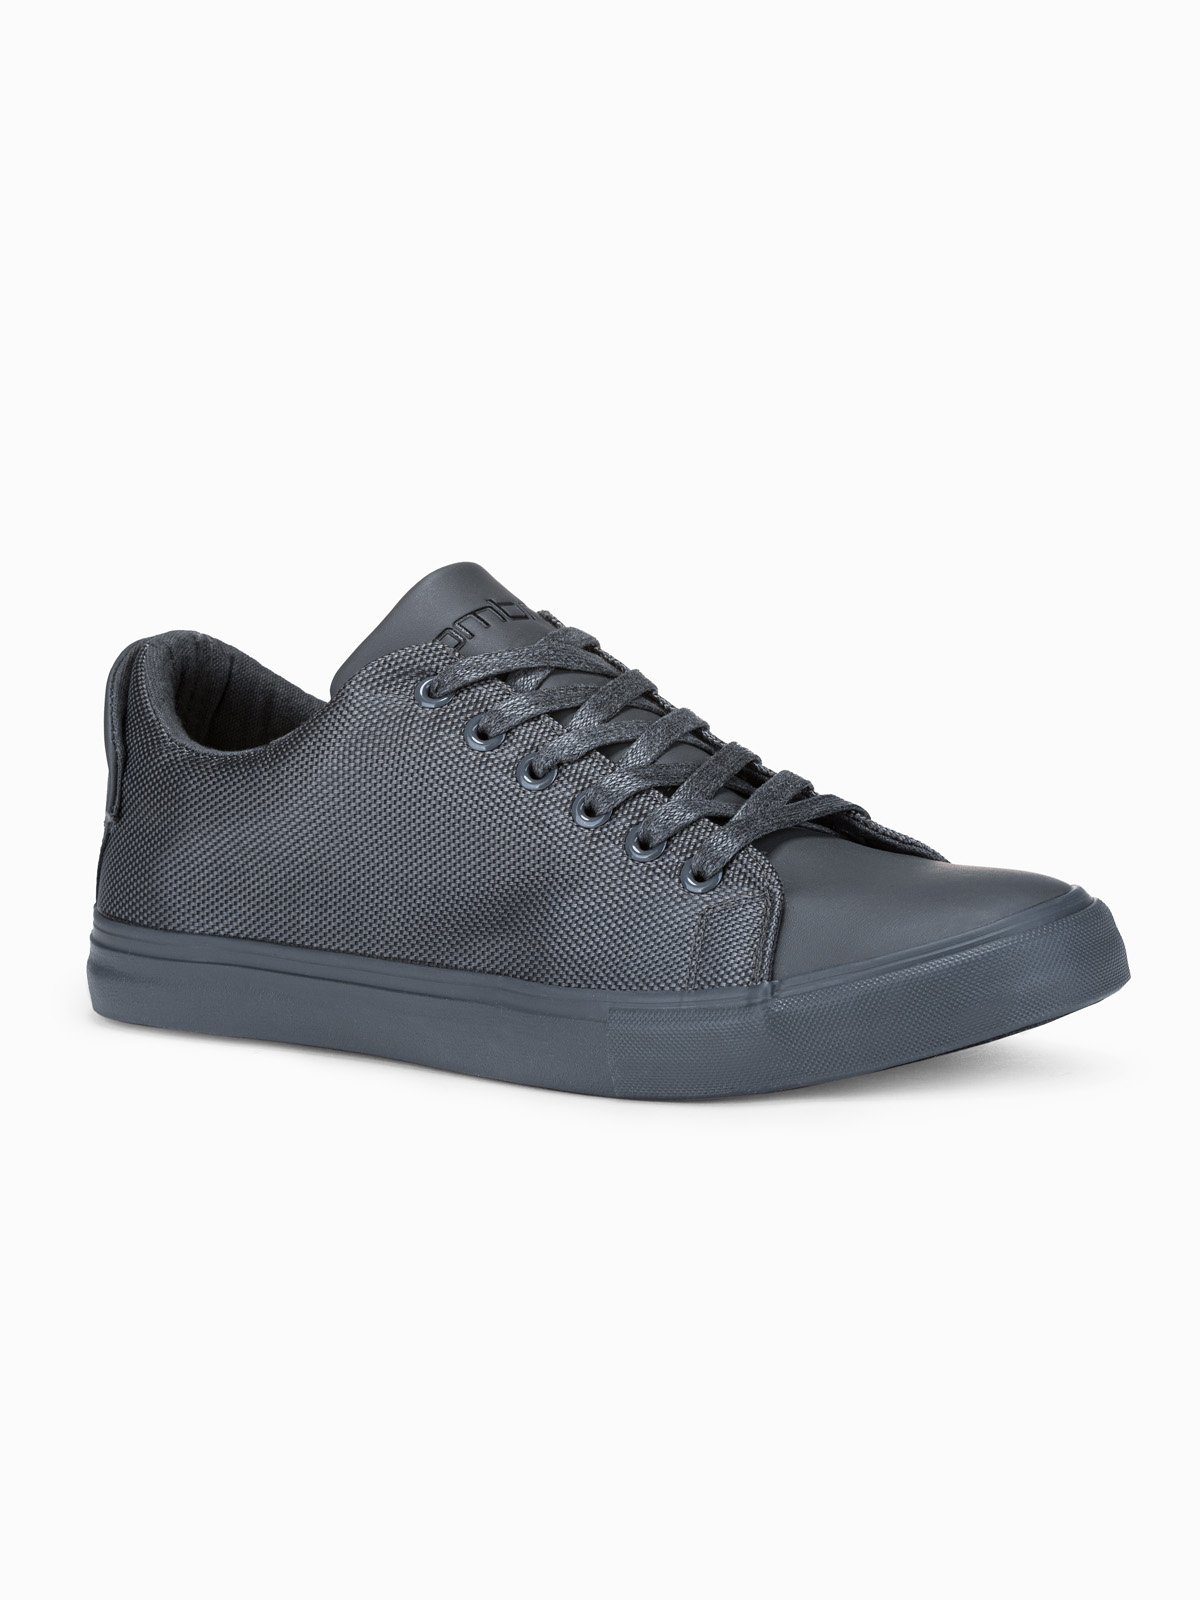 Ombre BASIC men's shoes sneakers in combined materials - gray